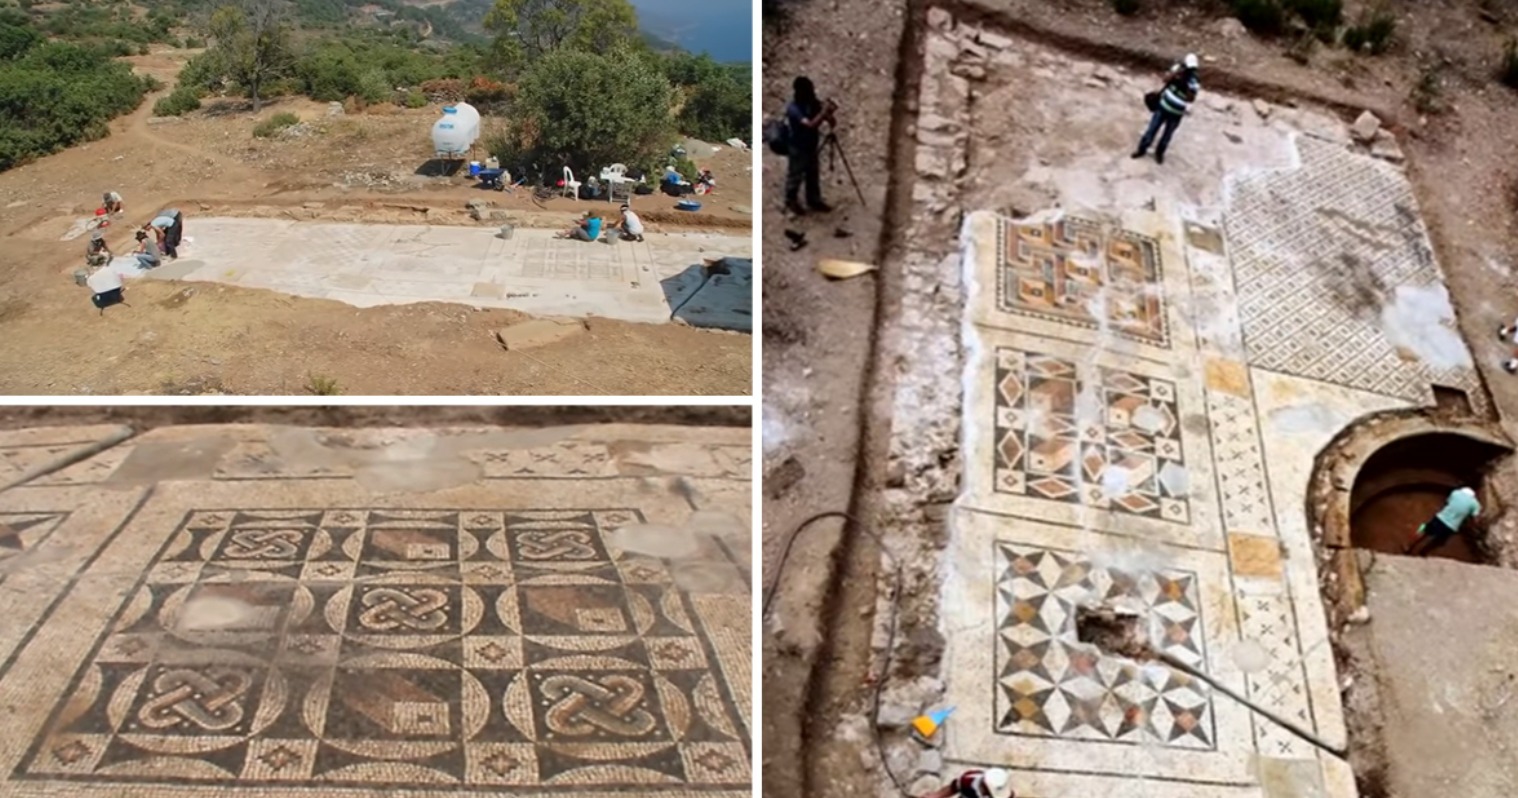 Large Roman Mosaic Discovered Under a Farmer’s Field in Turkey (video)